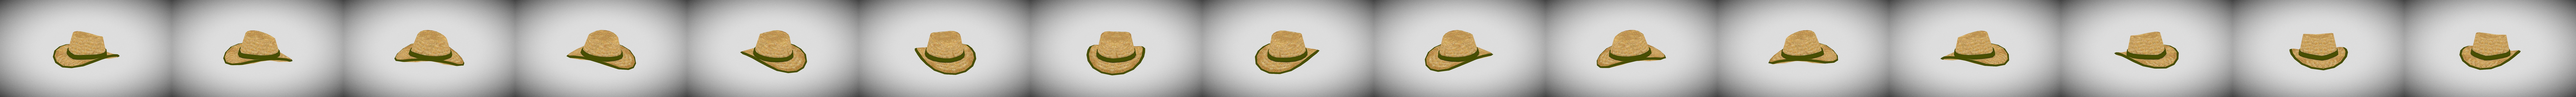 Straw Hat For Roblox Game Buy Royalty Free 3d Model By Catafest Catafest 14ccdf3 - roblox clothes that go good with the straw hat